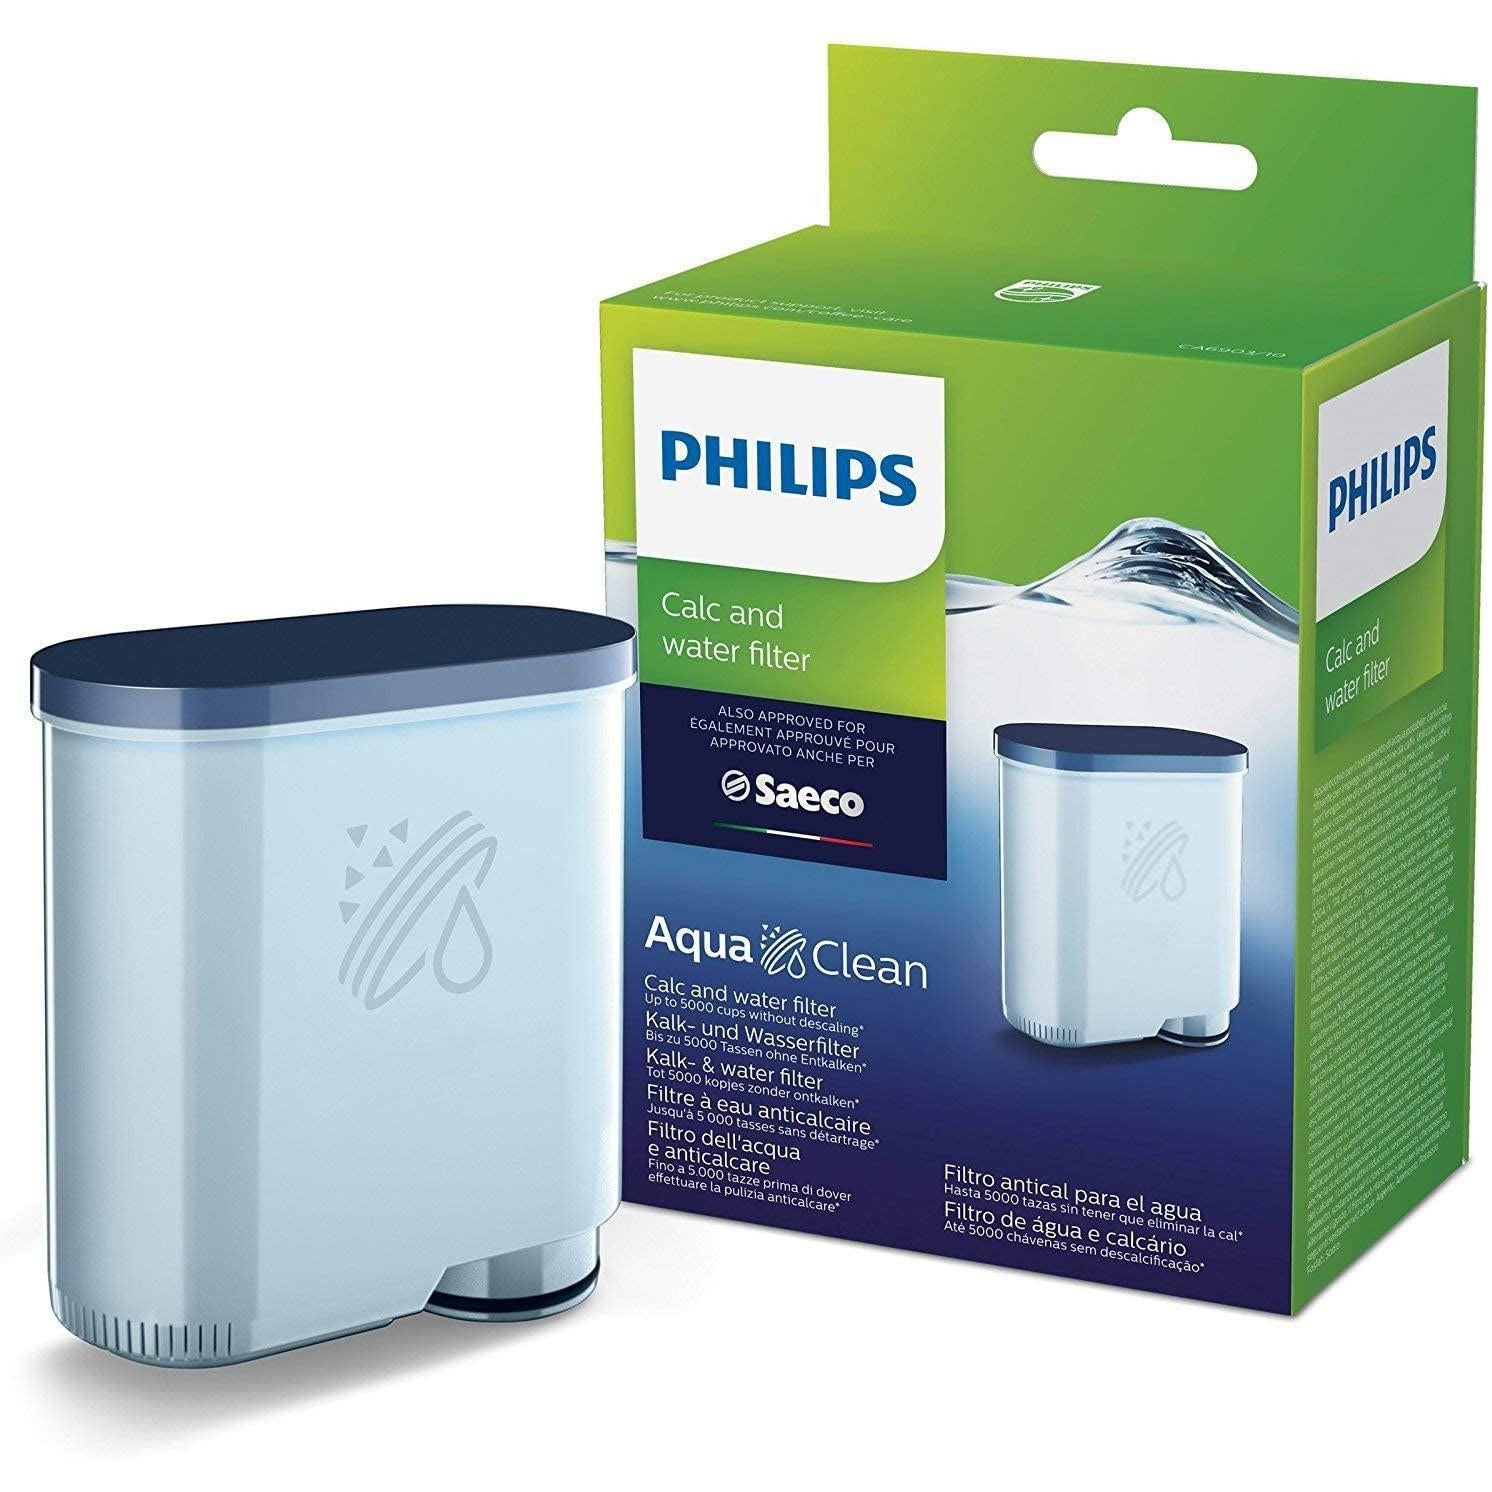 Philips AquaClean Calc and Water FIlter for Espresso Machine - CA6903/